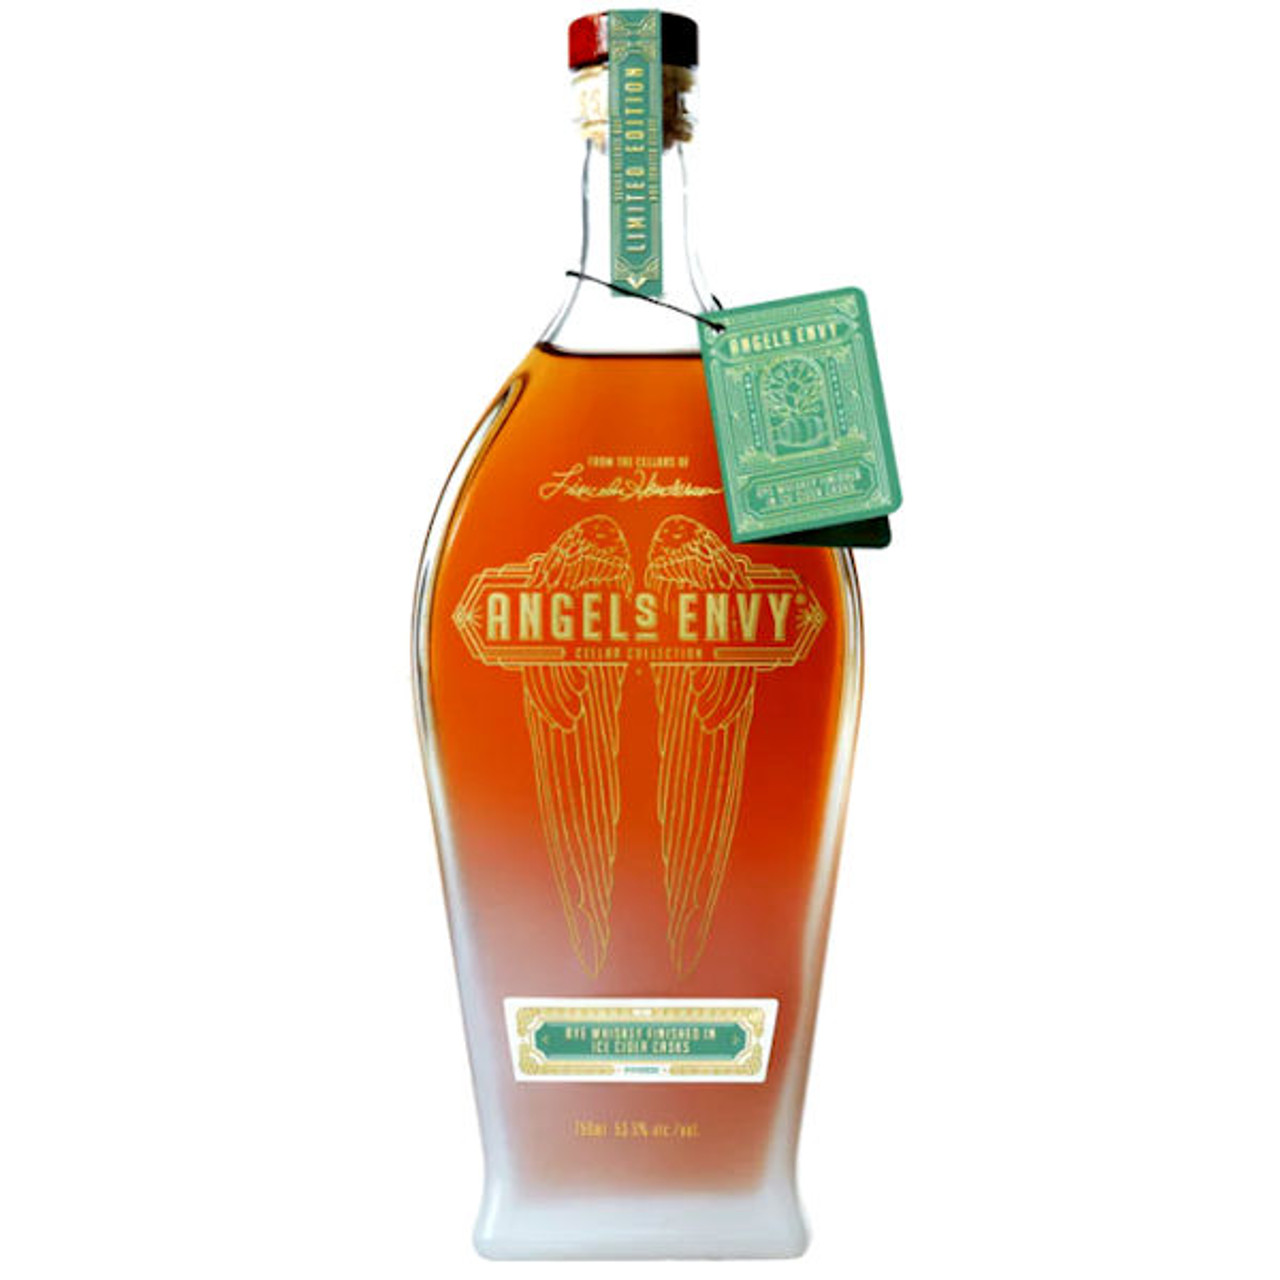 https://cdn11.bigcommerce.com/s-a04d0/images/stencil/1280x1280/products/22350/24232/angels-envy-ice-cider-casks-finished-rye-whiskey__35579.1661873991.jpg?c=2